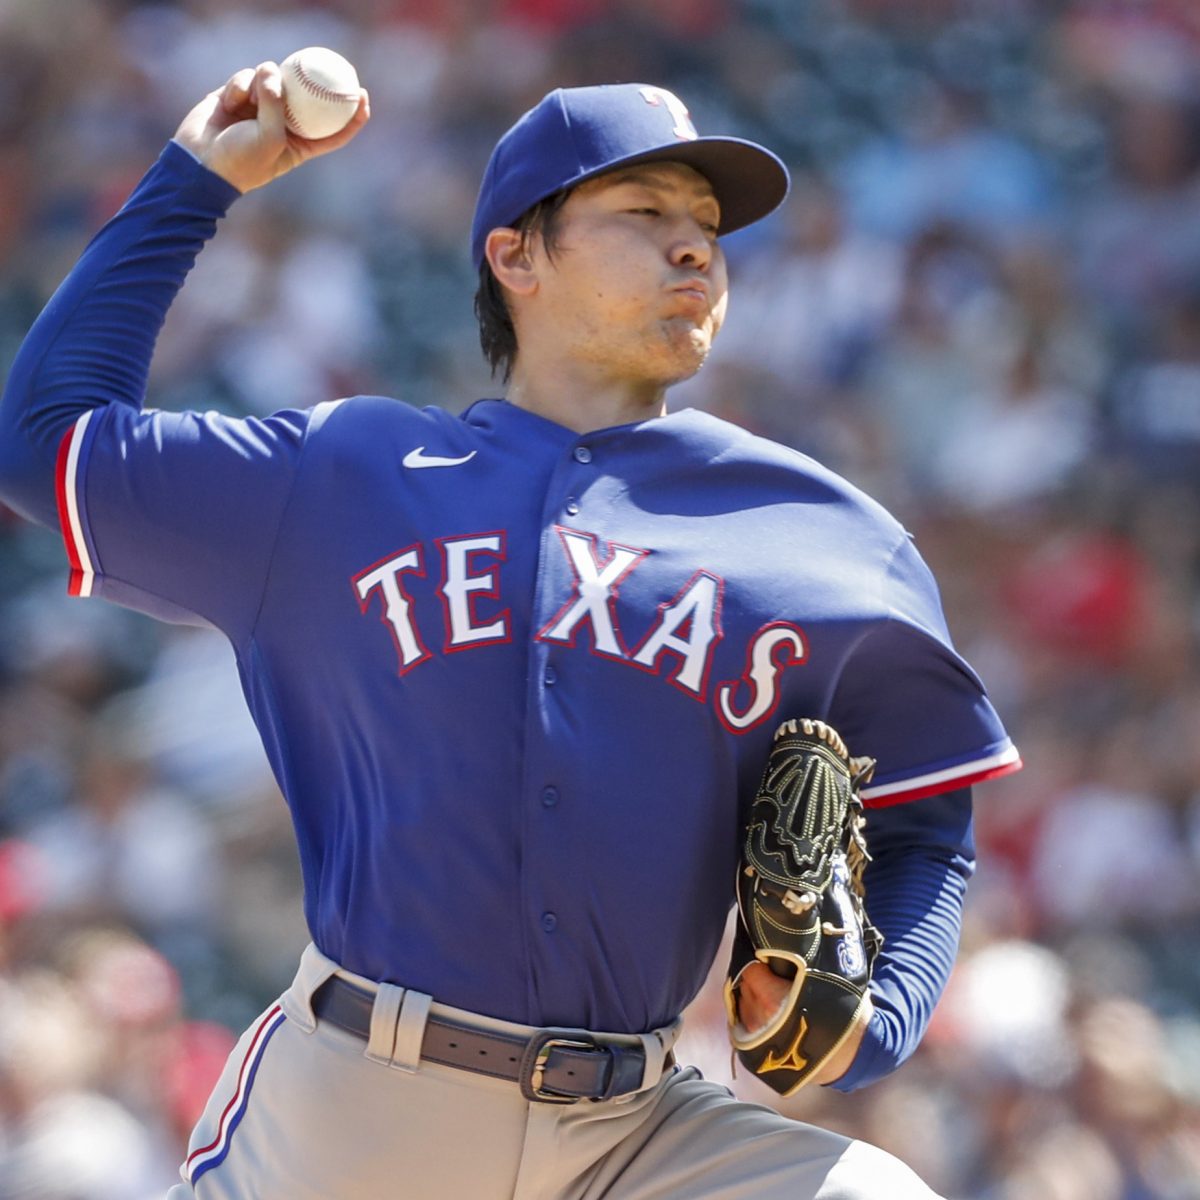 Oakland Athletics vs. Texas Rangers Prediction, Preview, and Odds - 9-13-2022